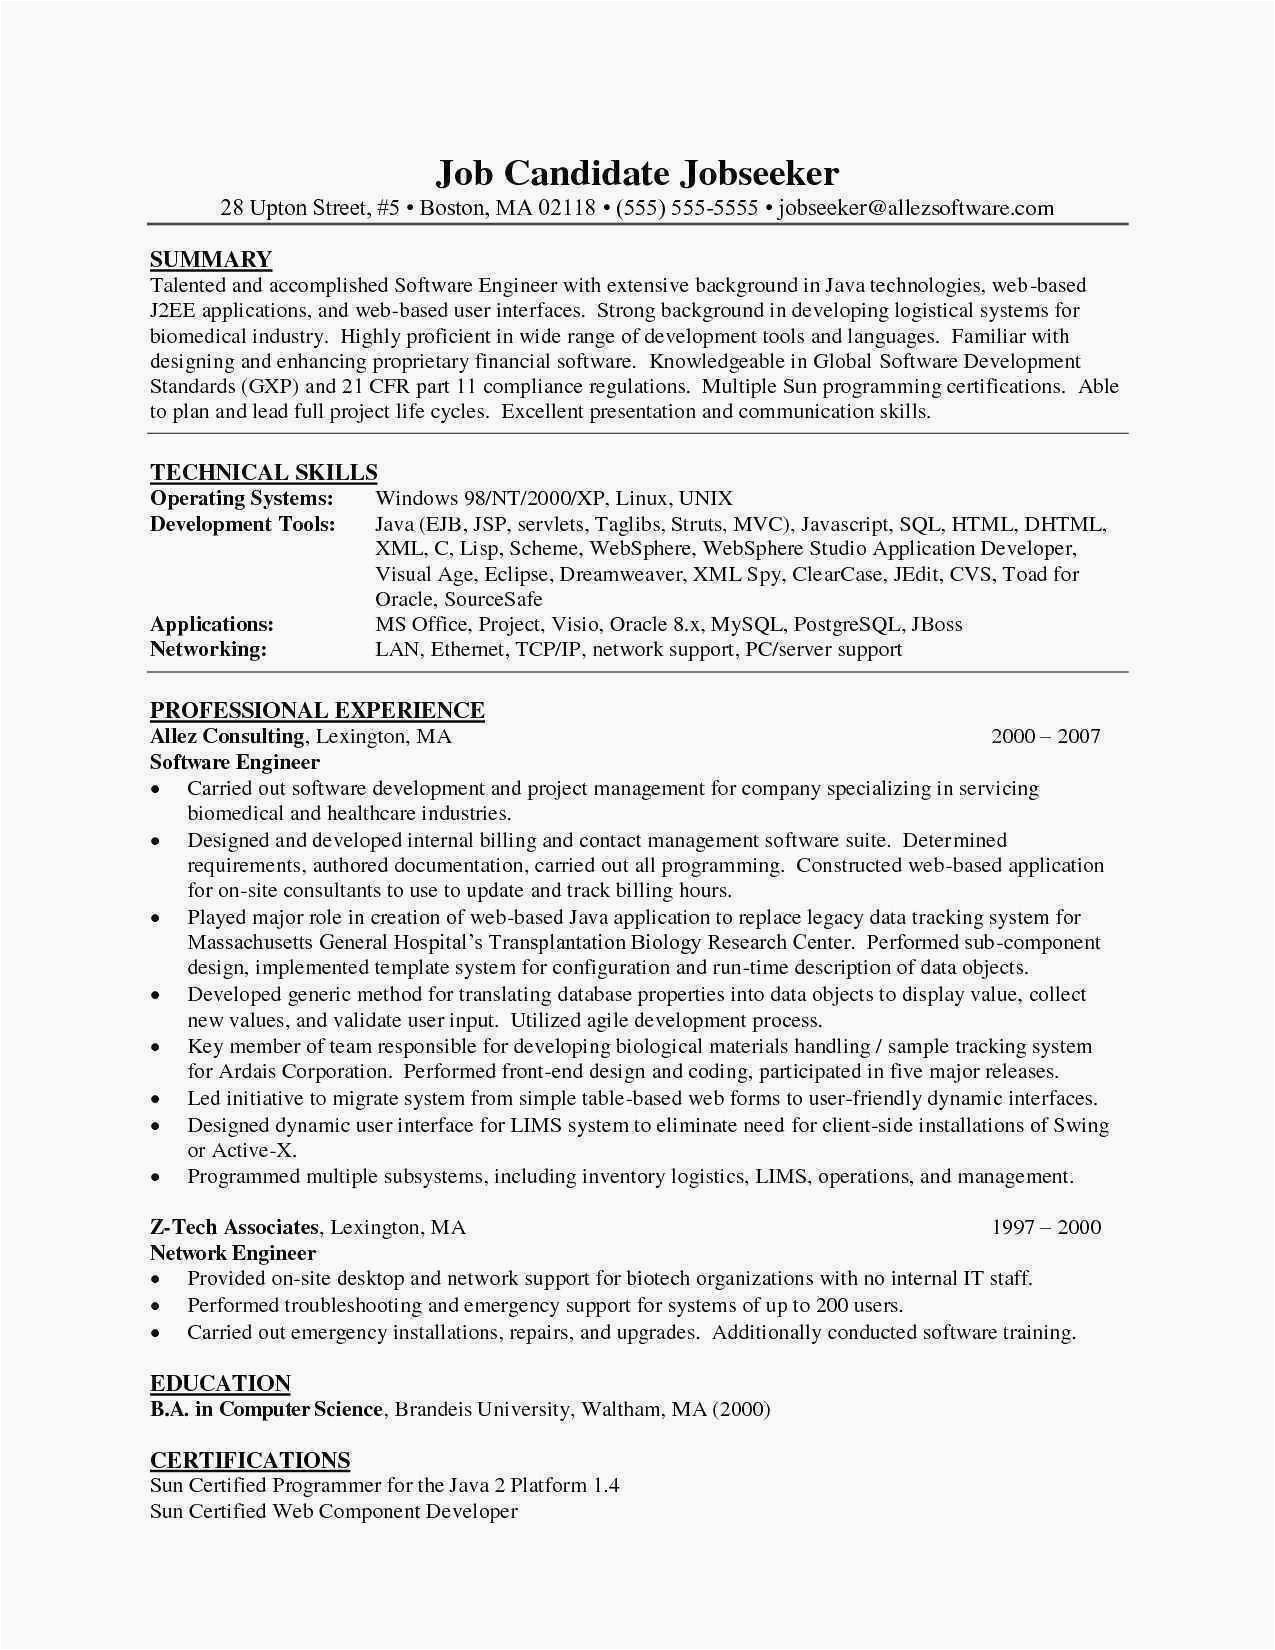 Sample Resume for 1 Year Experience In Network Engineer 8 Year Experience